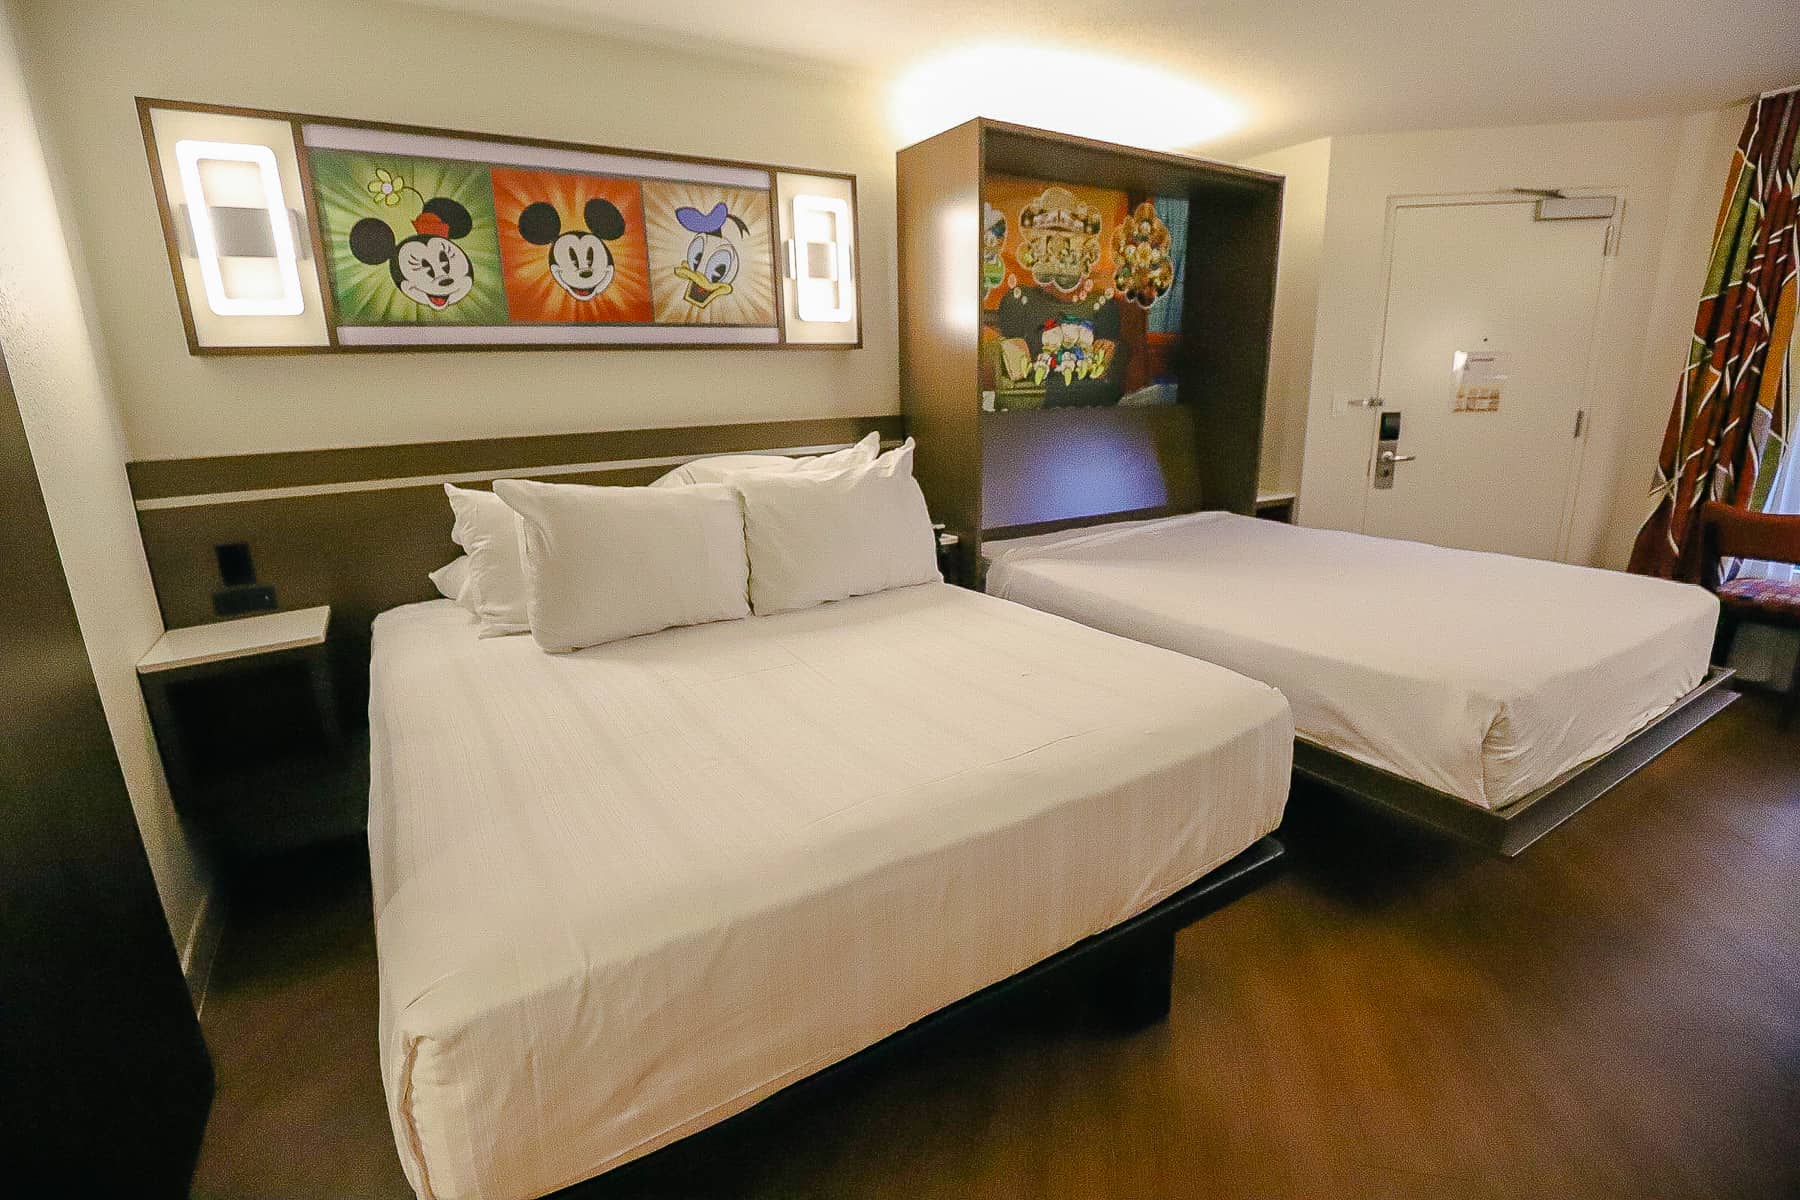 final look at the room at Disney's All-Star Sports 